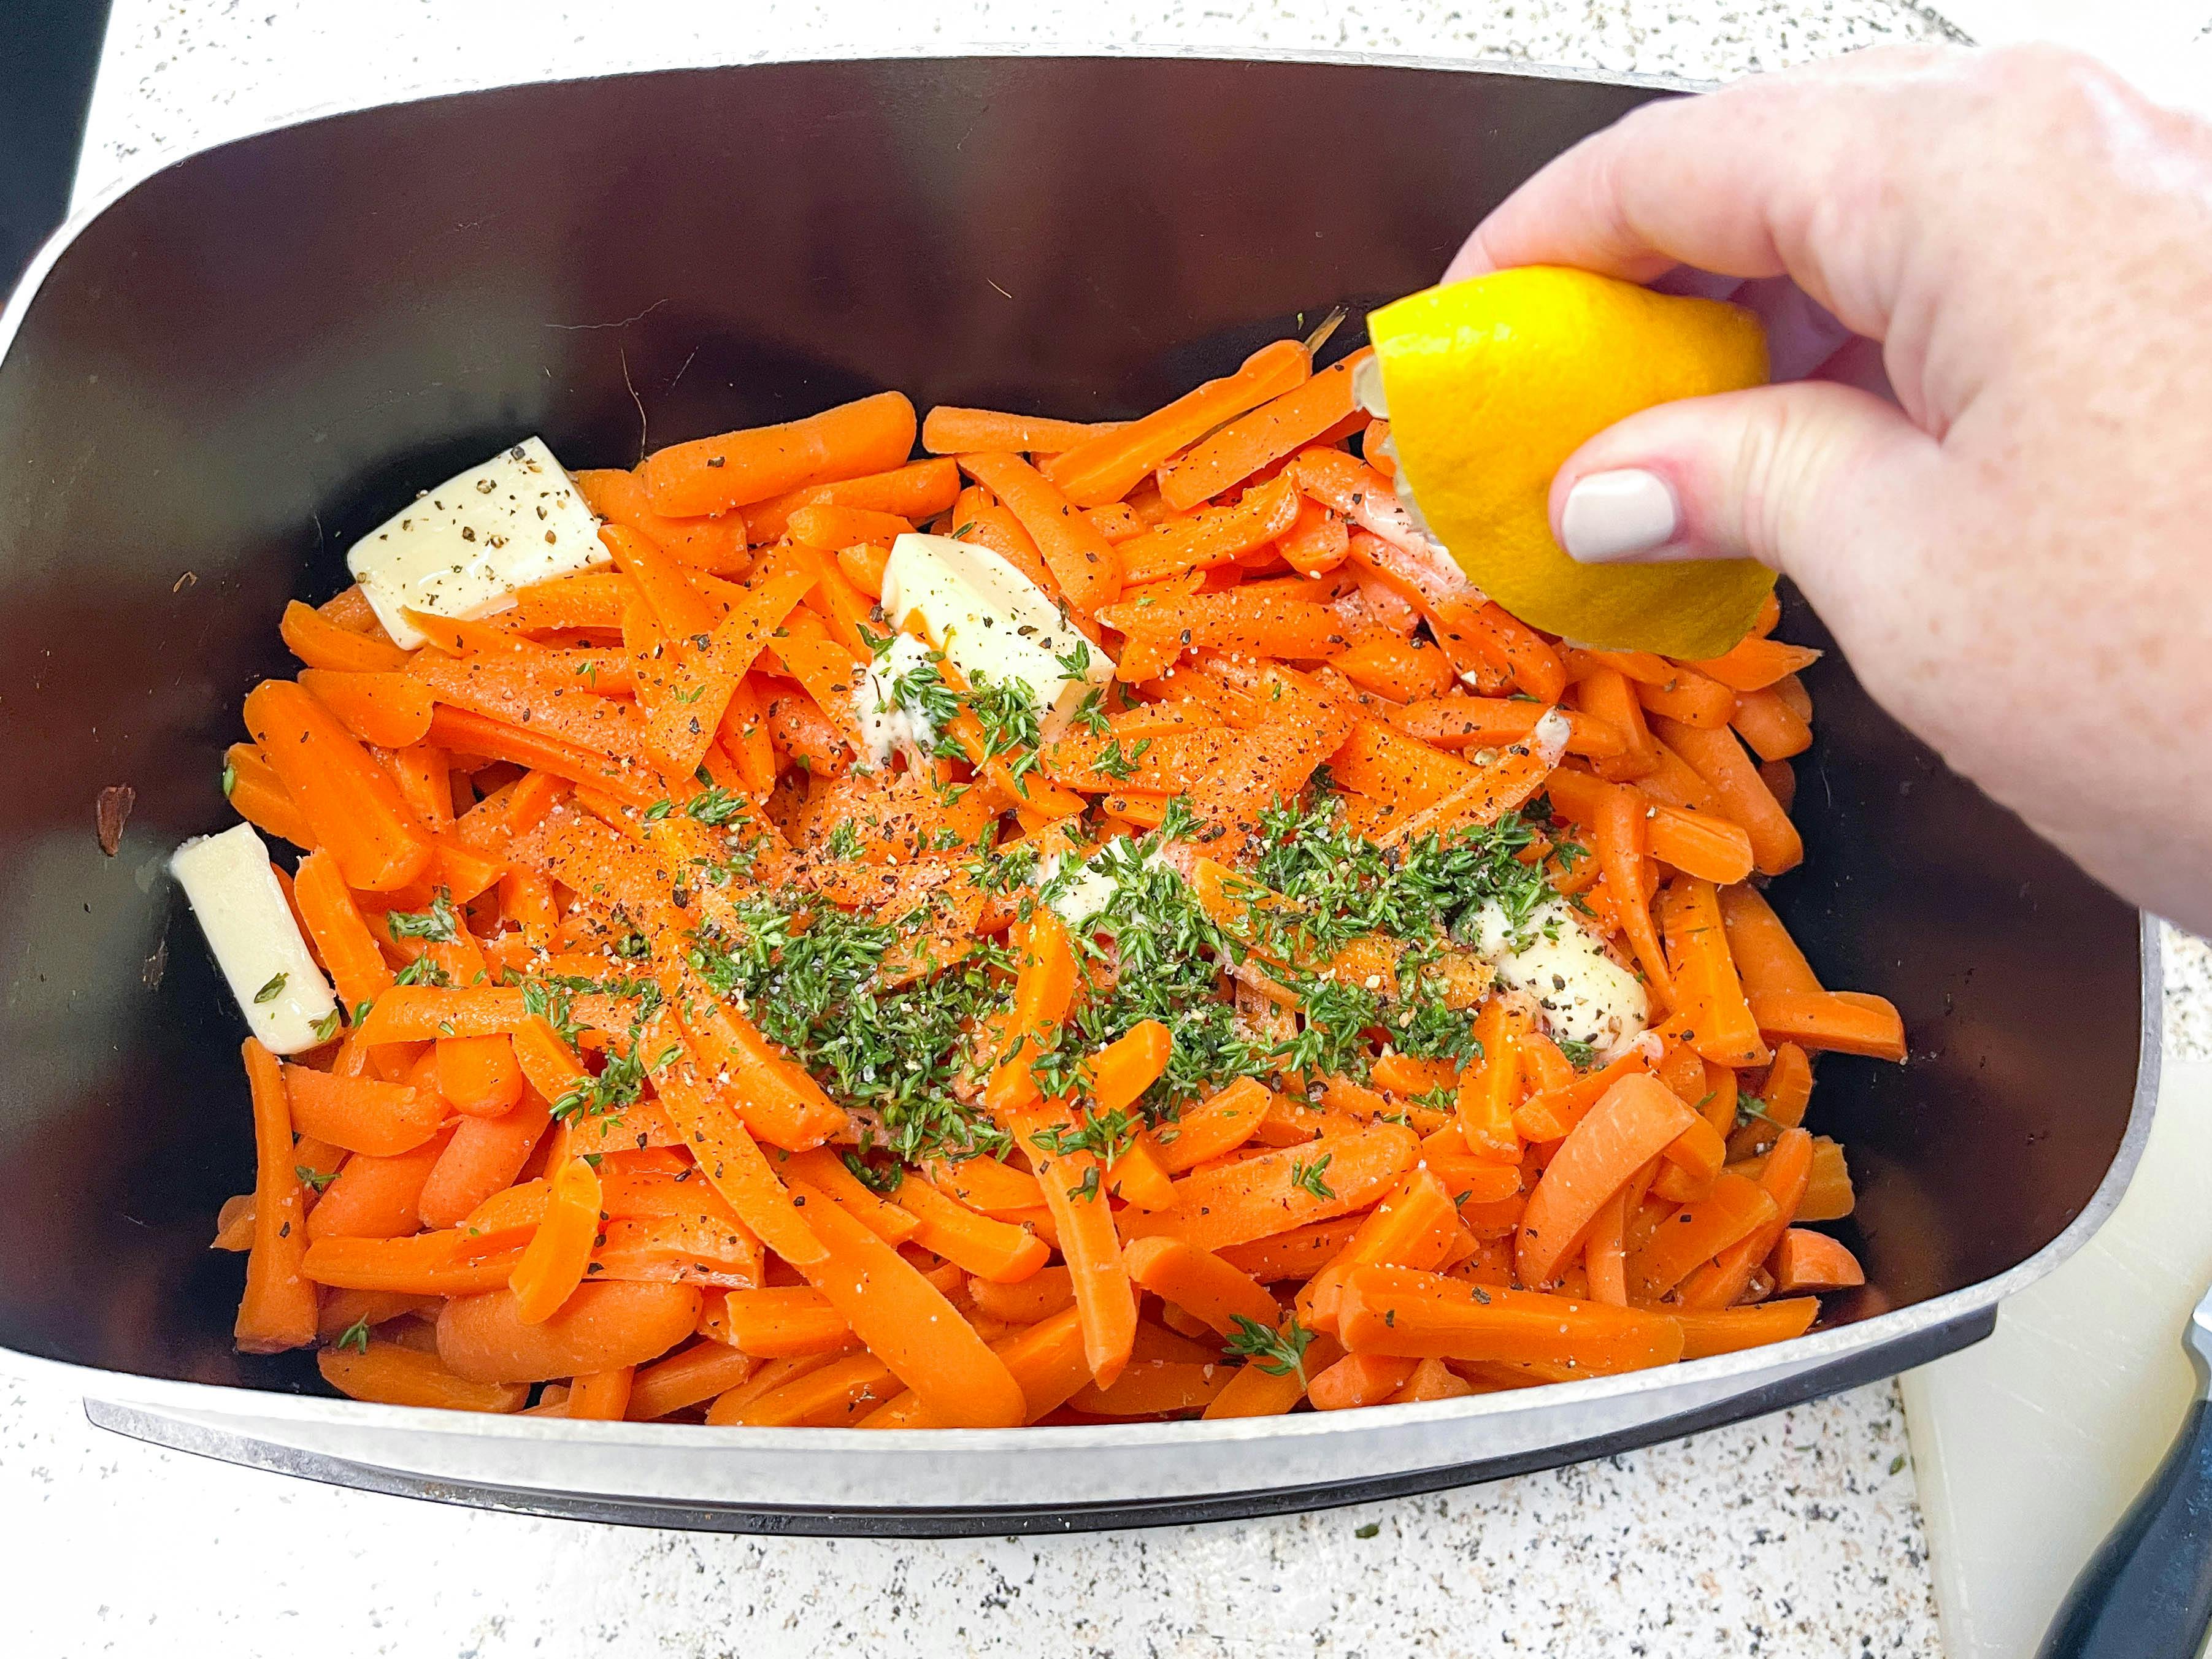 a person's hand squeezing lemon into a slow cooker filled with carrots, butter, and thyme.